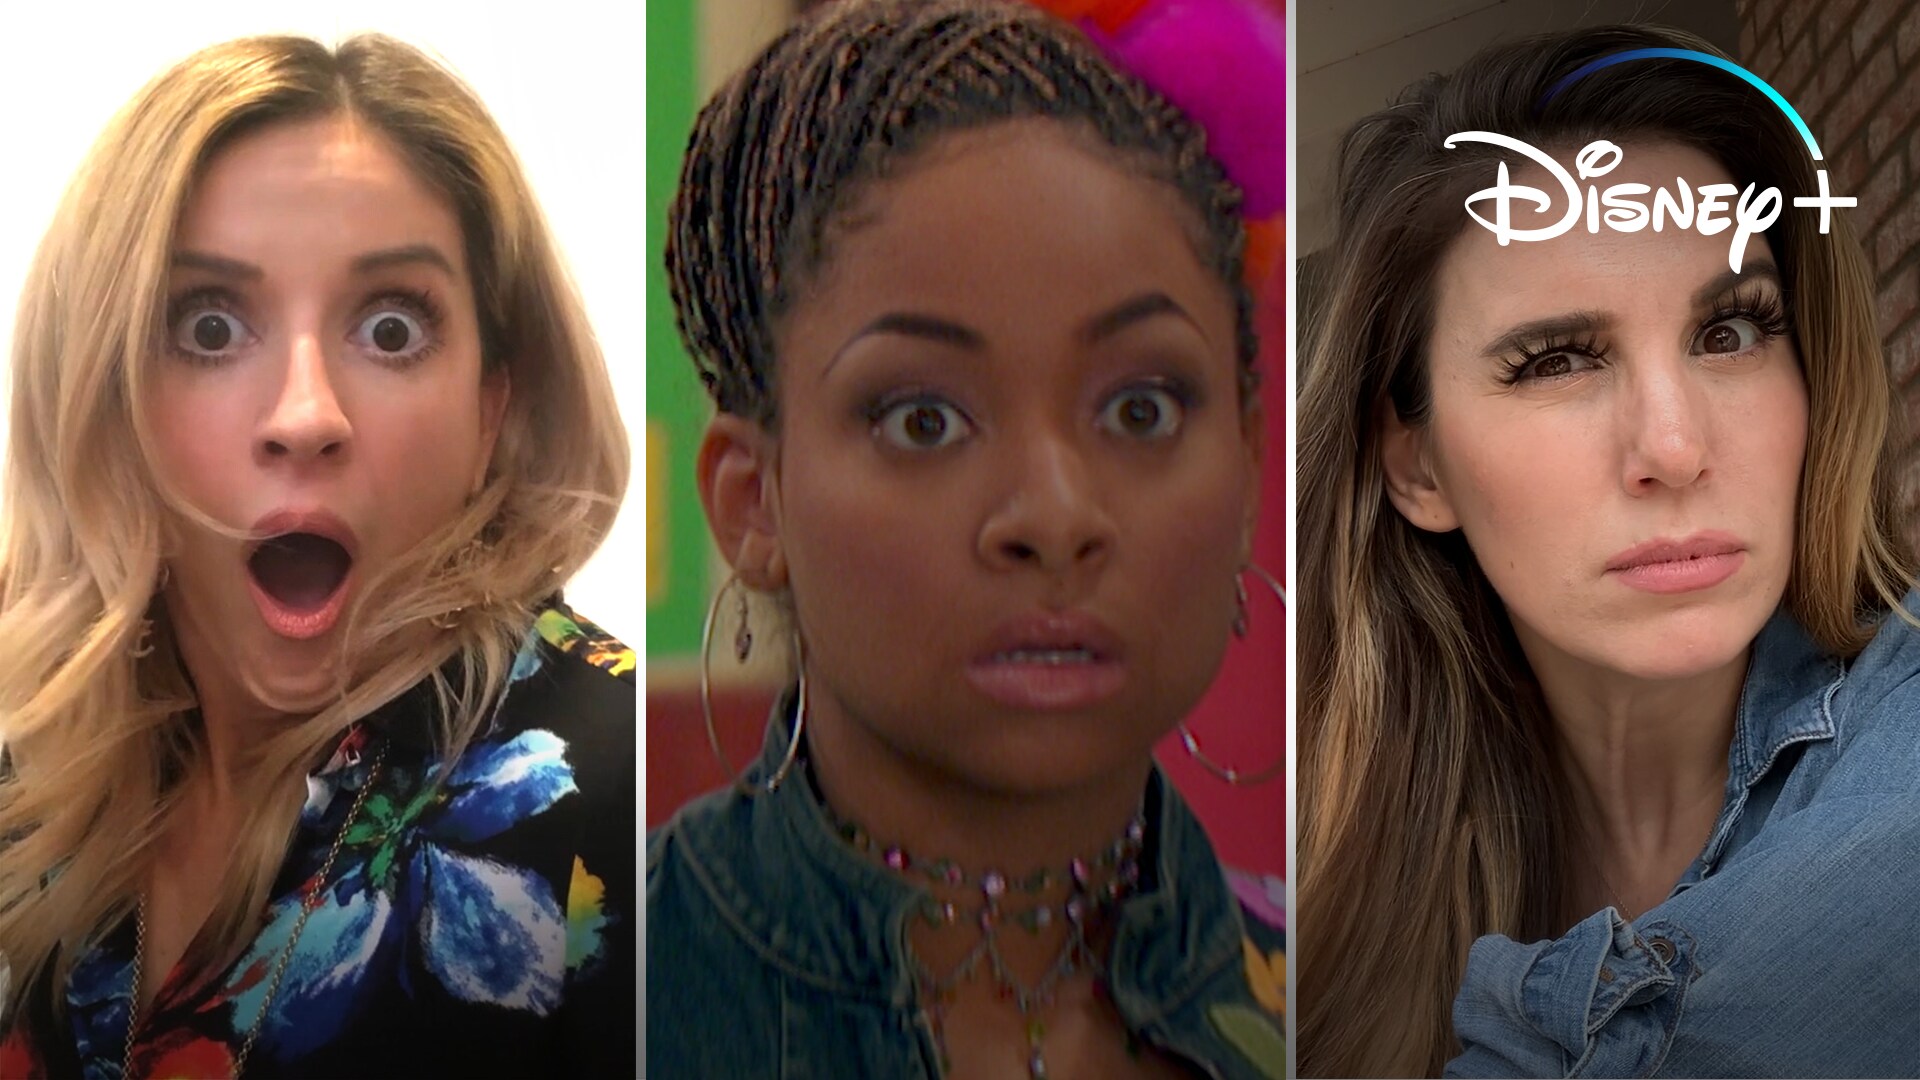 Your Favorite Disney Channel Stars Attempt to Re-Create Raven’s Iconic Vision Face